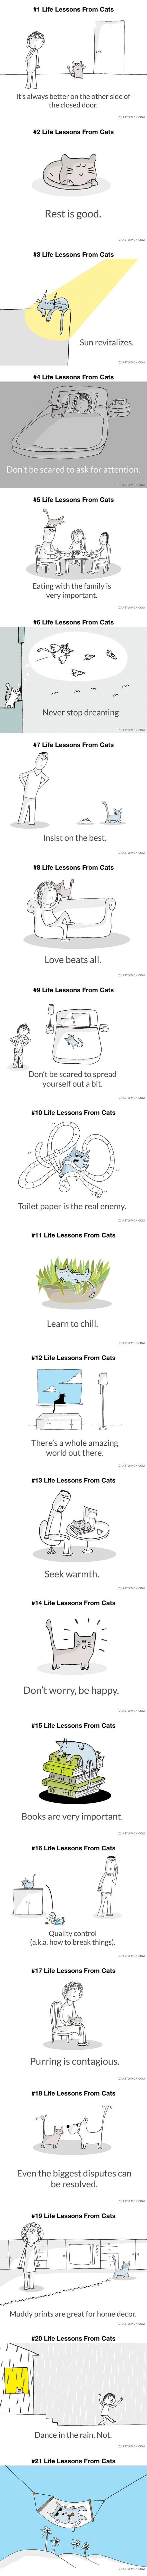 life-lesson-from-cats